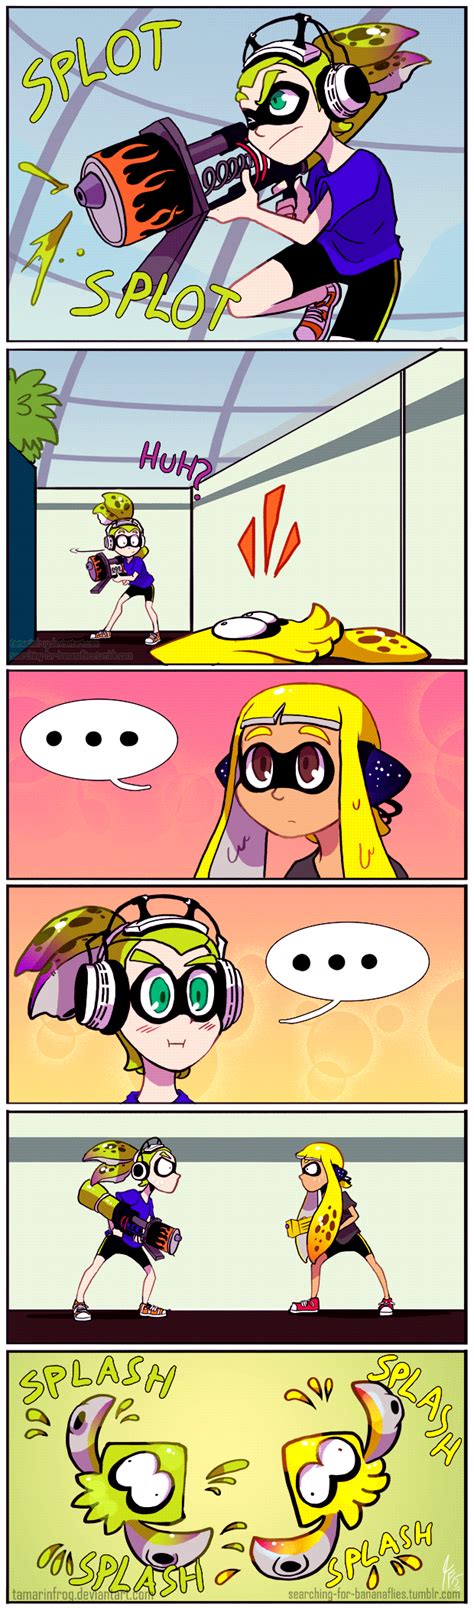 Inkling Inkling Girl And Inkling Boy Splatoon And 1 More Drawn By